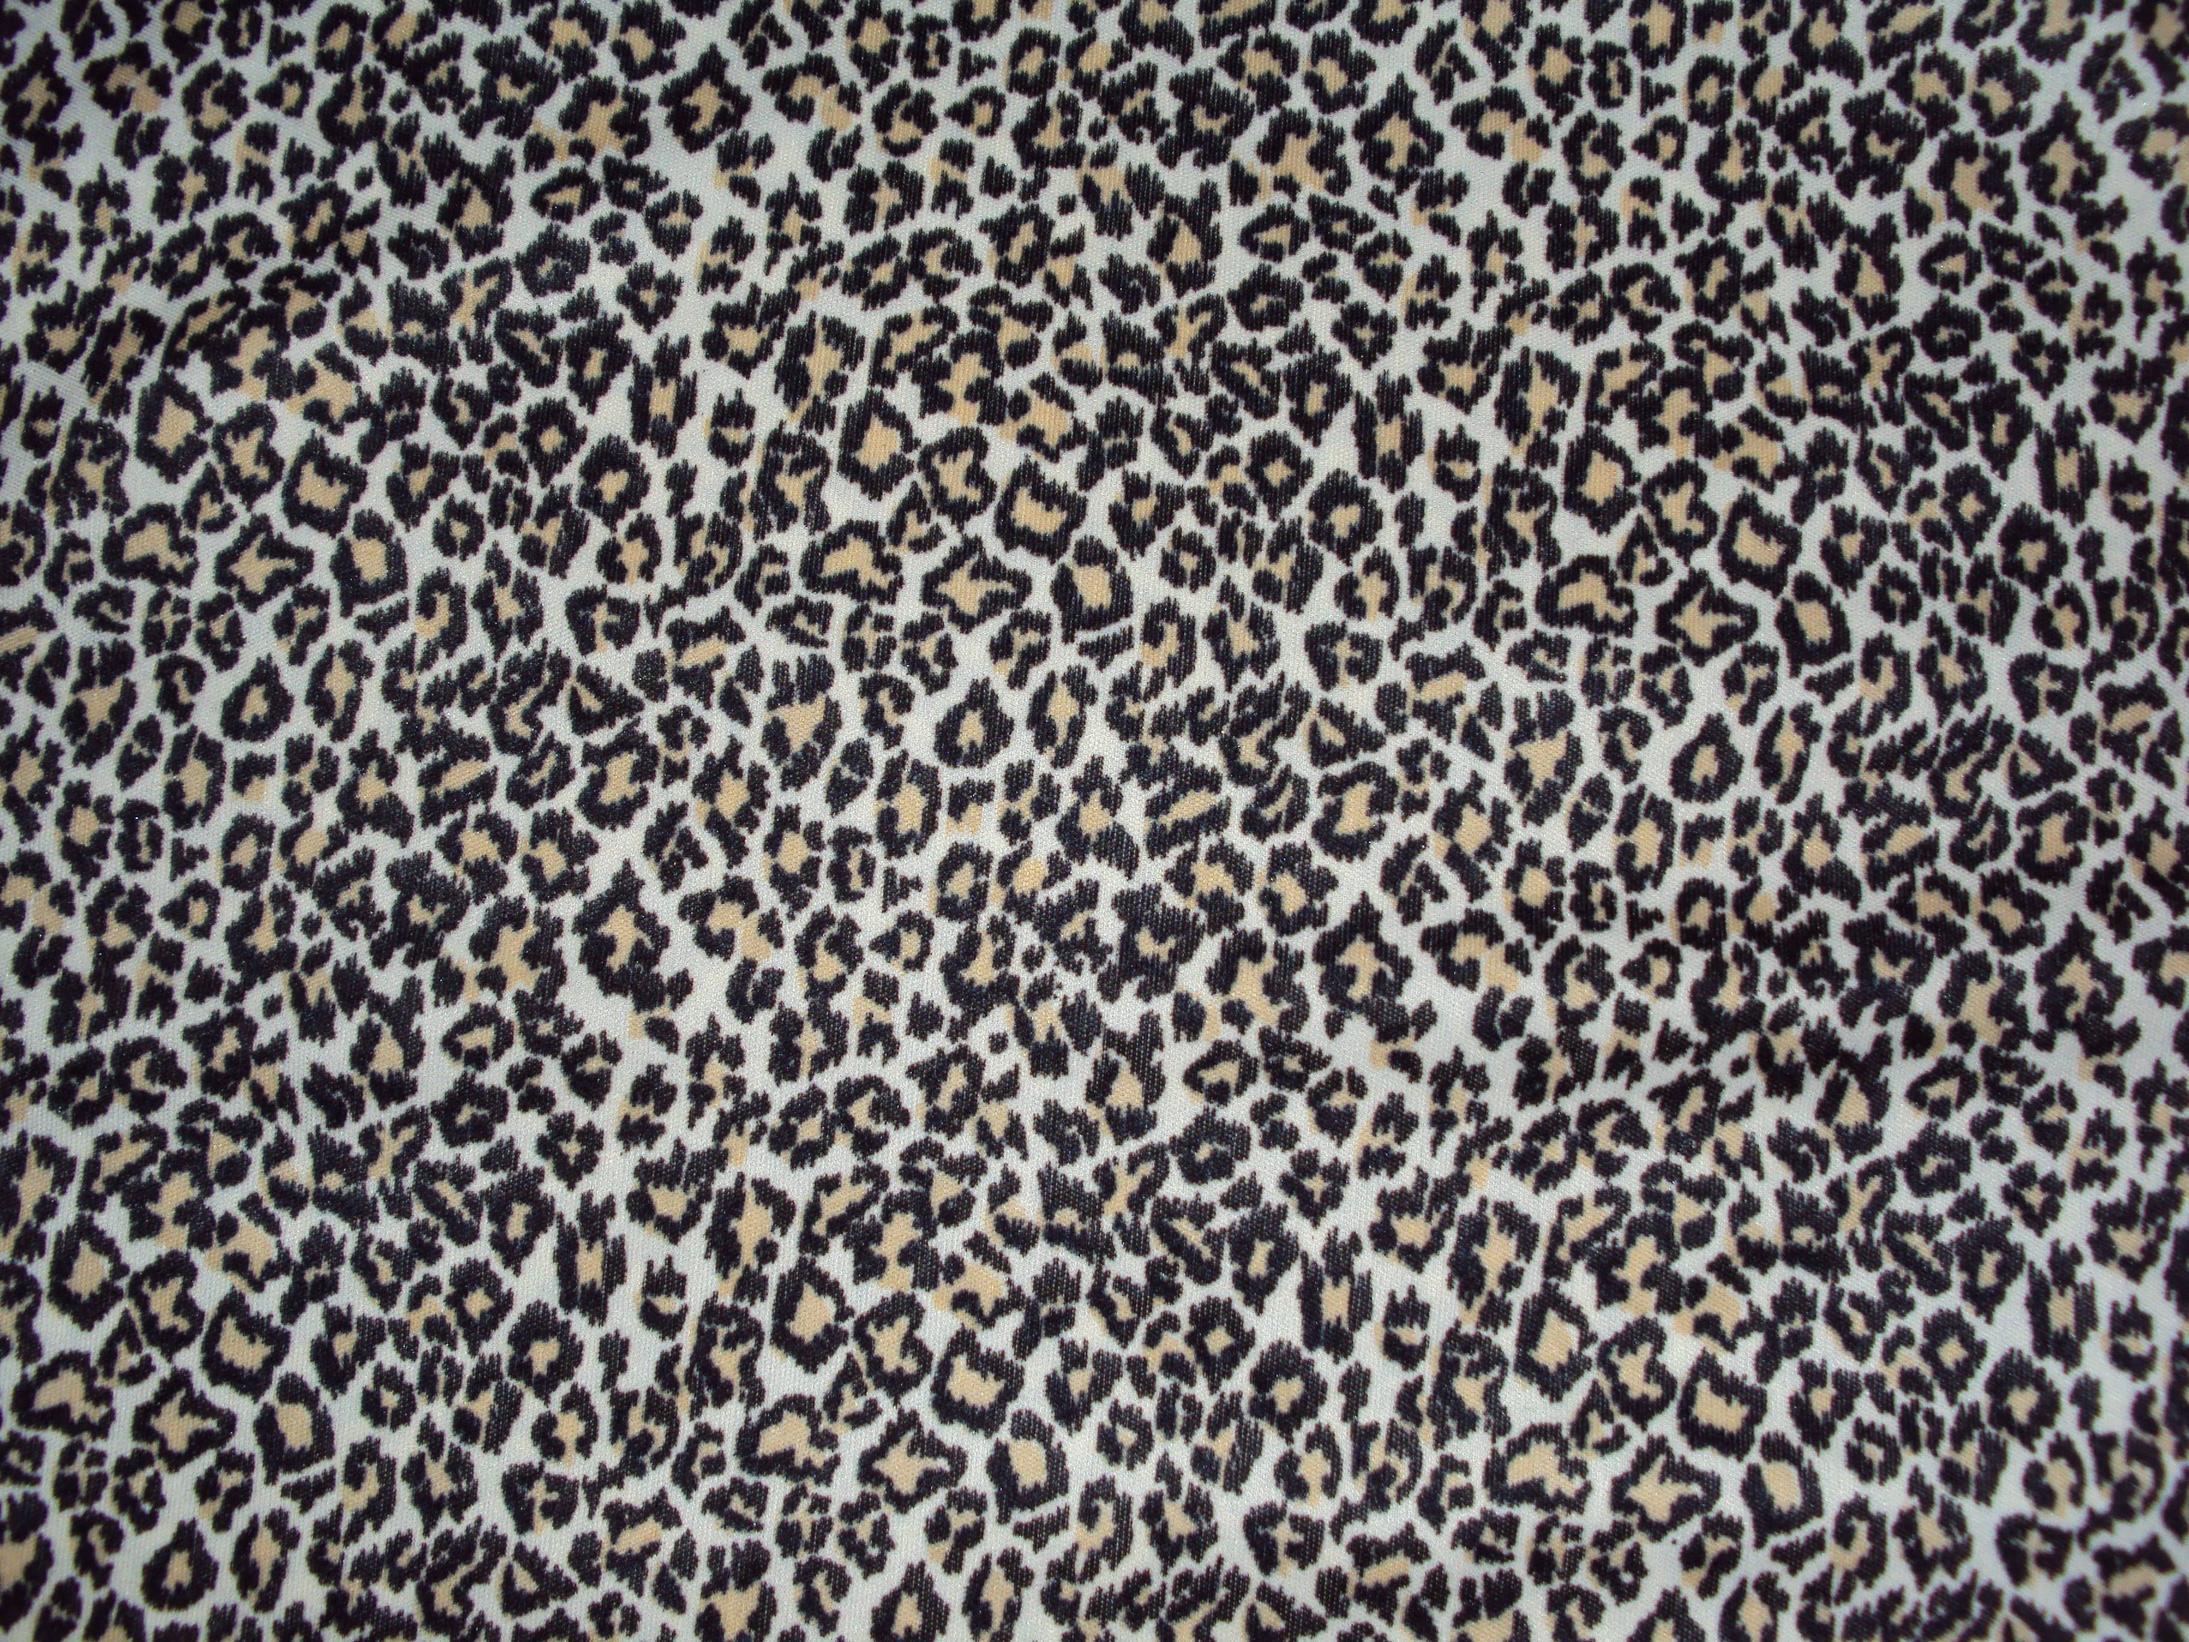 Download Another Leopard Texture Ghoulskout Wallpaper